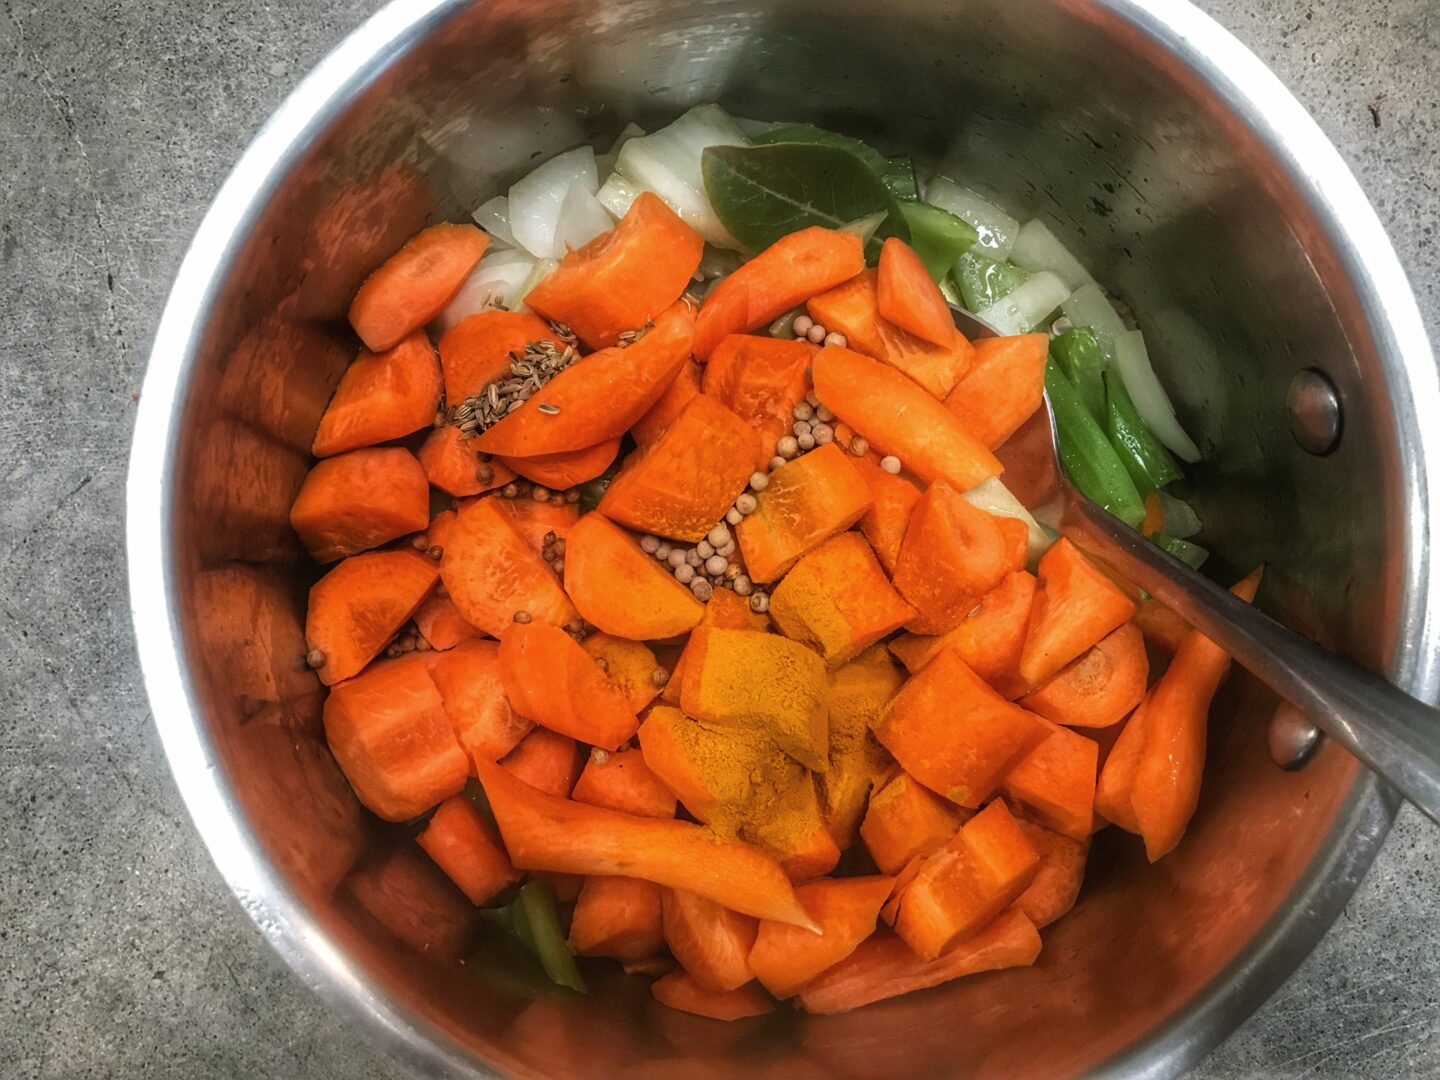 Carrots in a pot with a spoon.